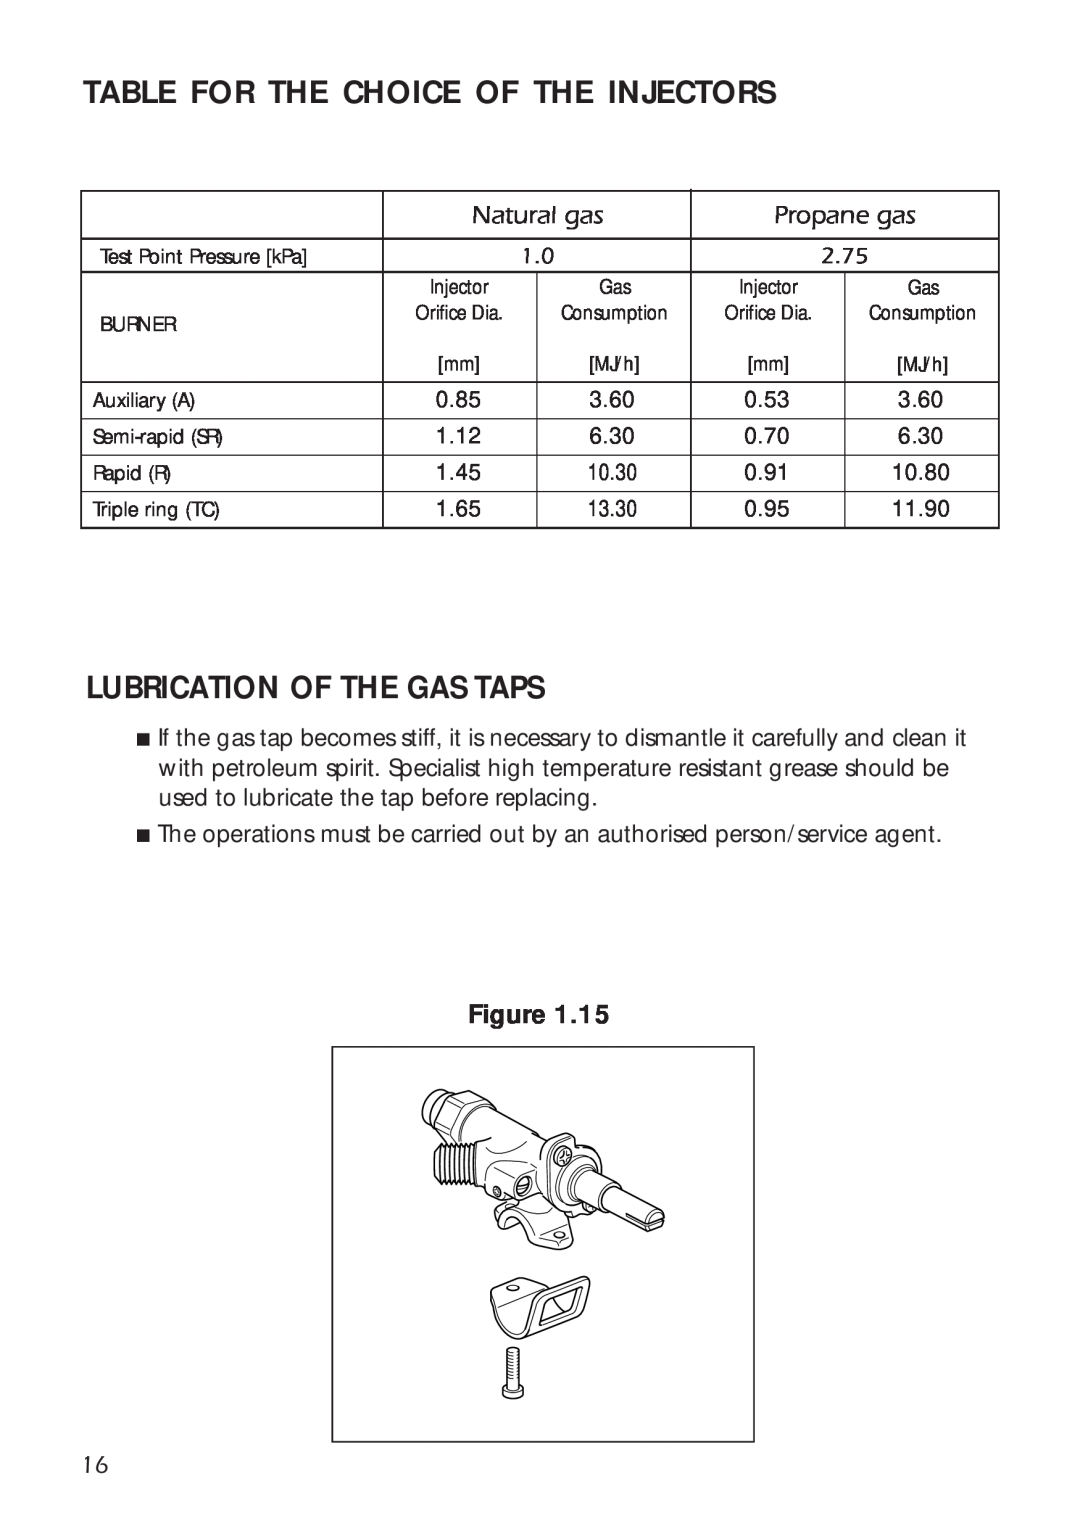 DeLonghi A 1346 G manual Table For The Choice Of The Injectors, Lubrication Of The Gas Taps 